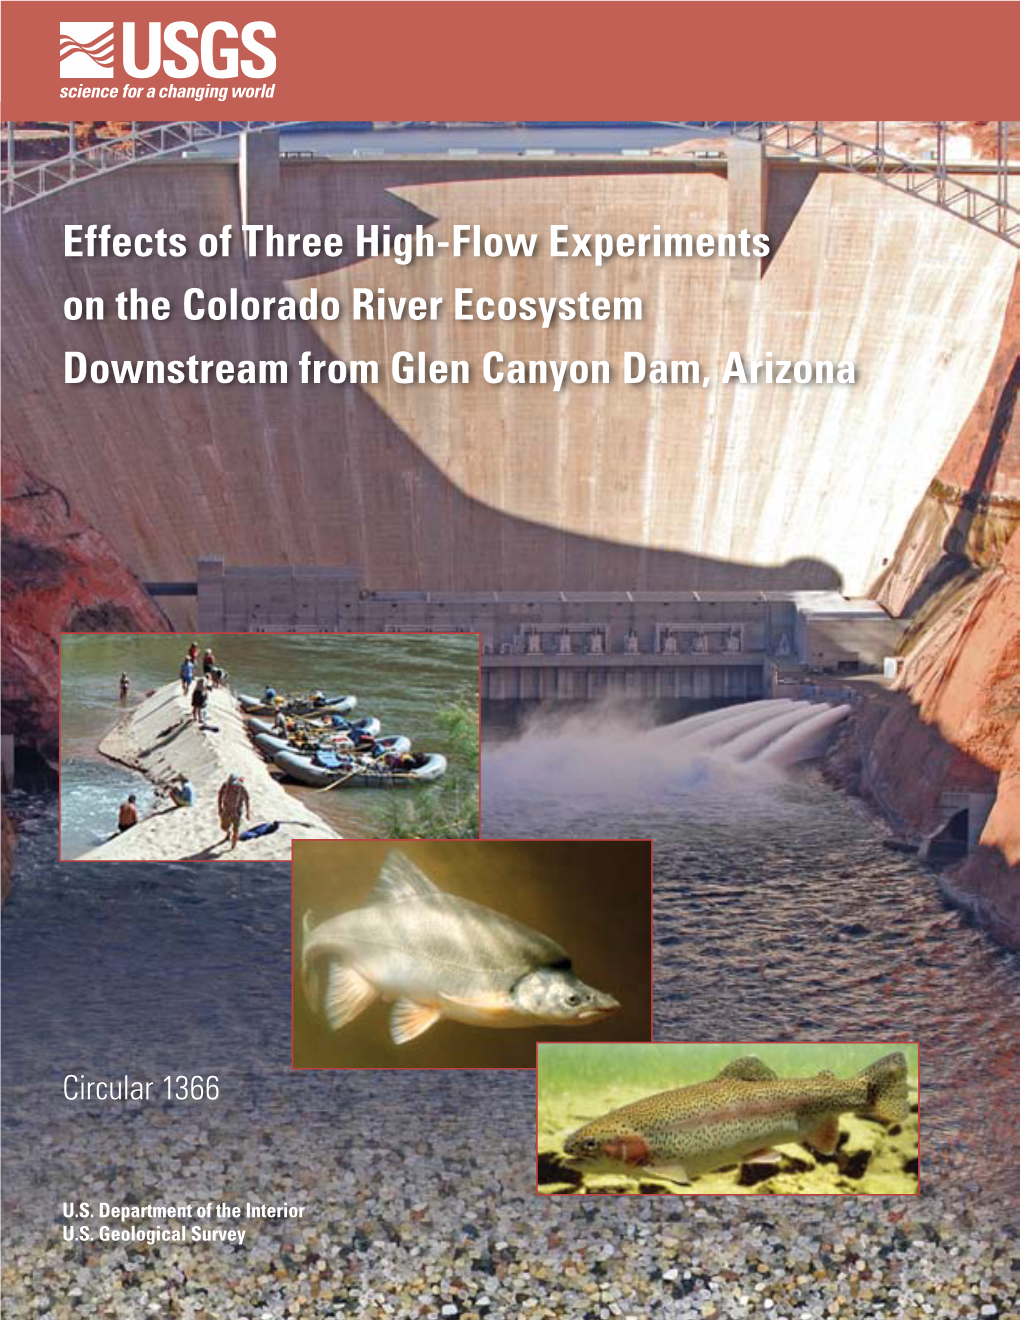 Effects of Three High-Flow Experiments on the Colorado River Ecosystem Downstream from Glen Canyon Dam, Arizona